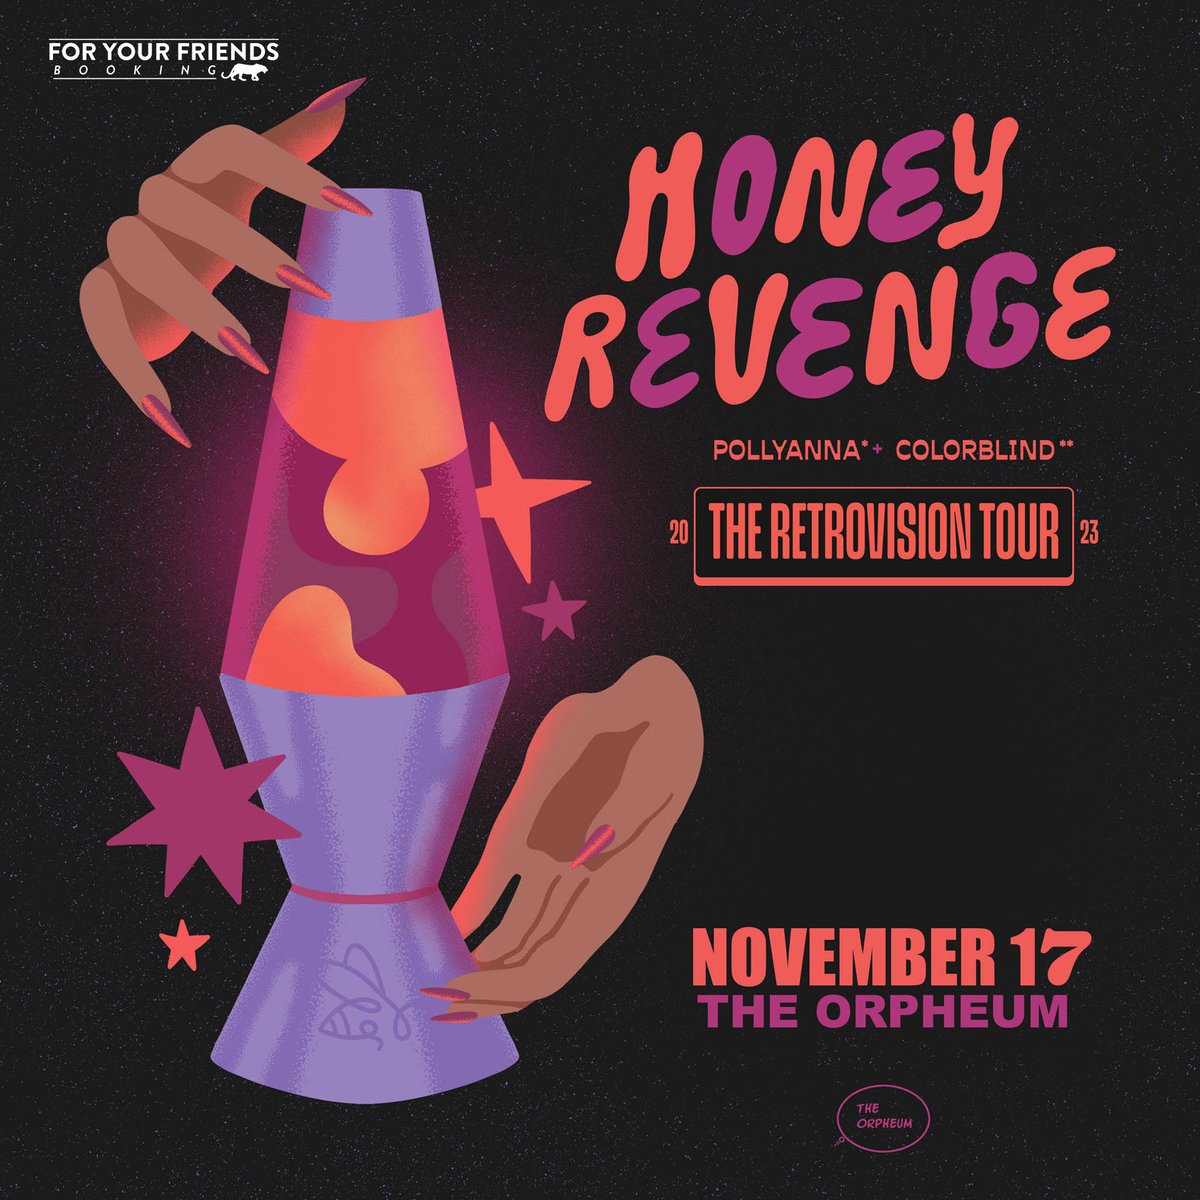 Don't miss @honeyrevengeca w/ @pollyannanj @colorblindtx on November 17th at @TAMPAOrpheum Tickets at theorpheum.com